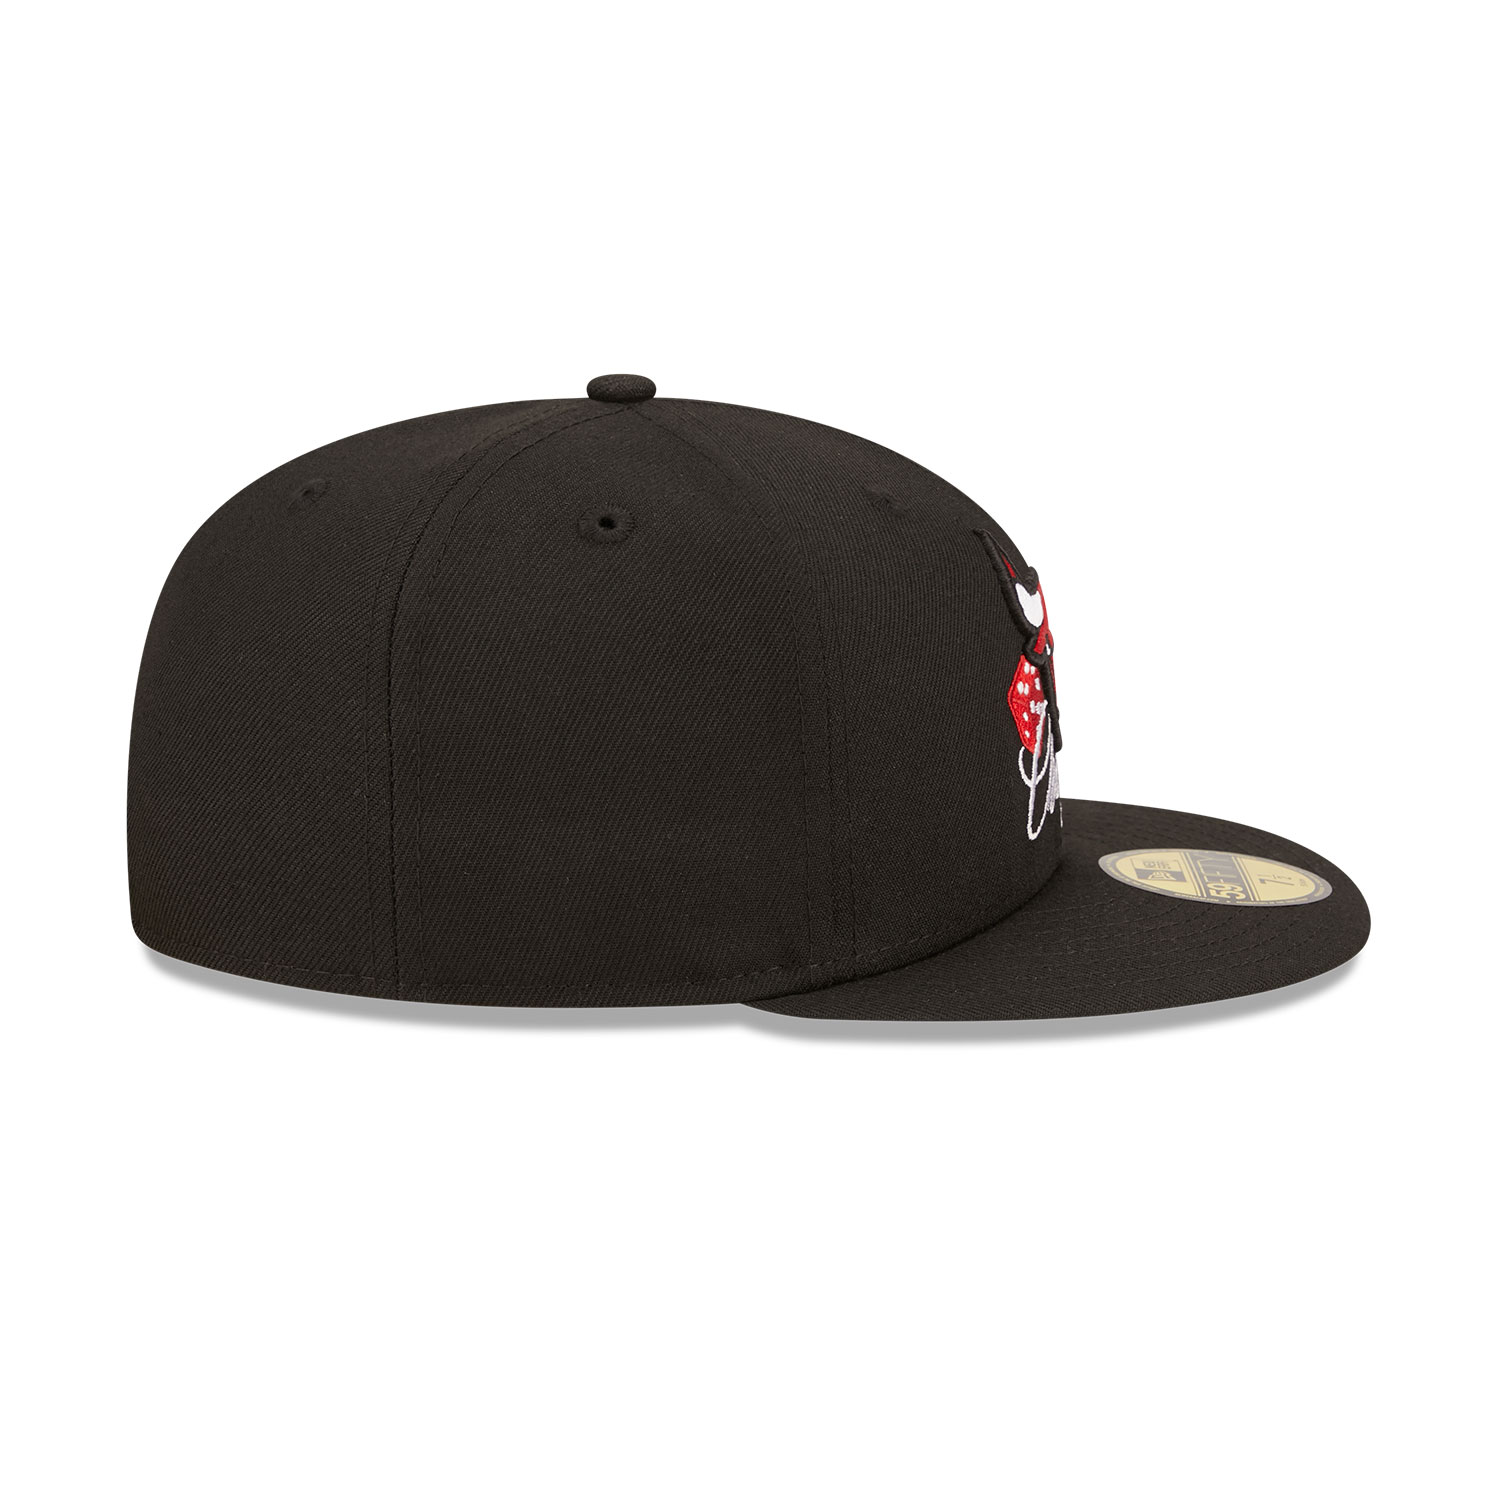 Chicago Bulls Roller Black 59FIFTY Fitted Cap